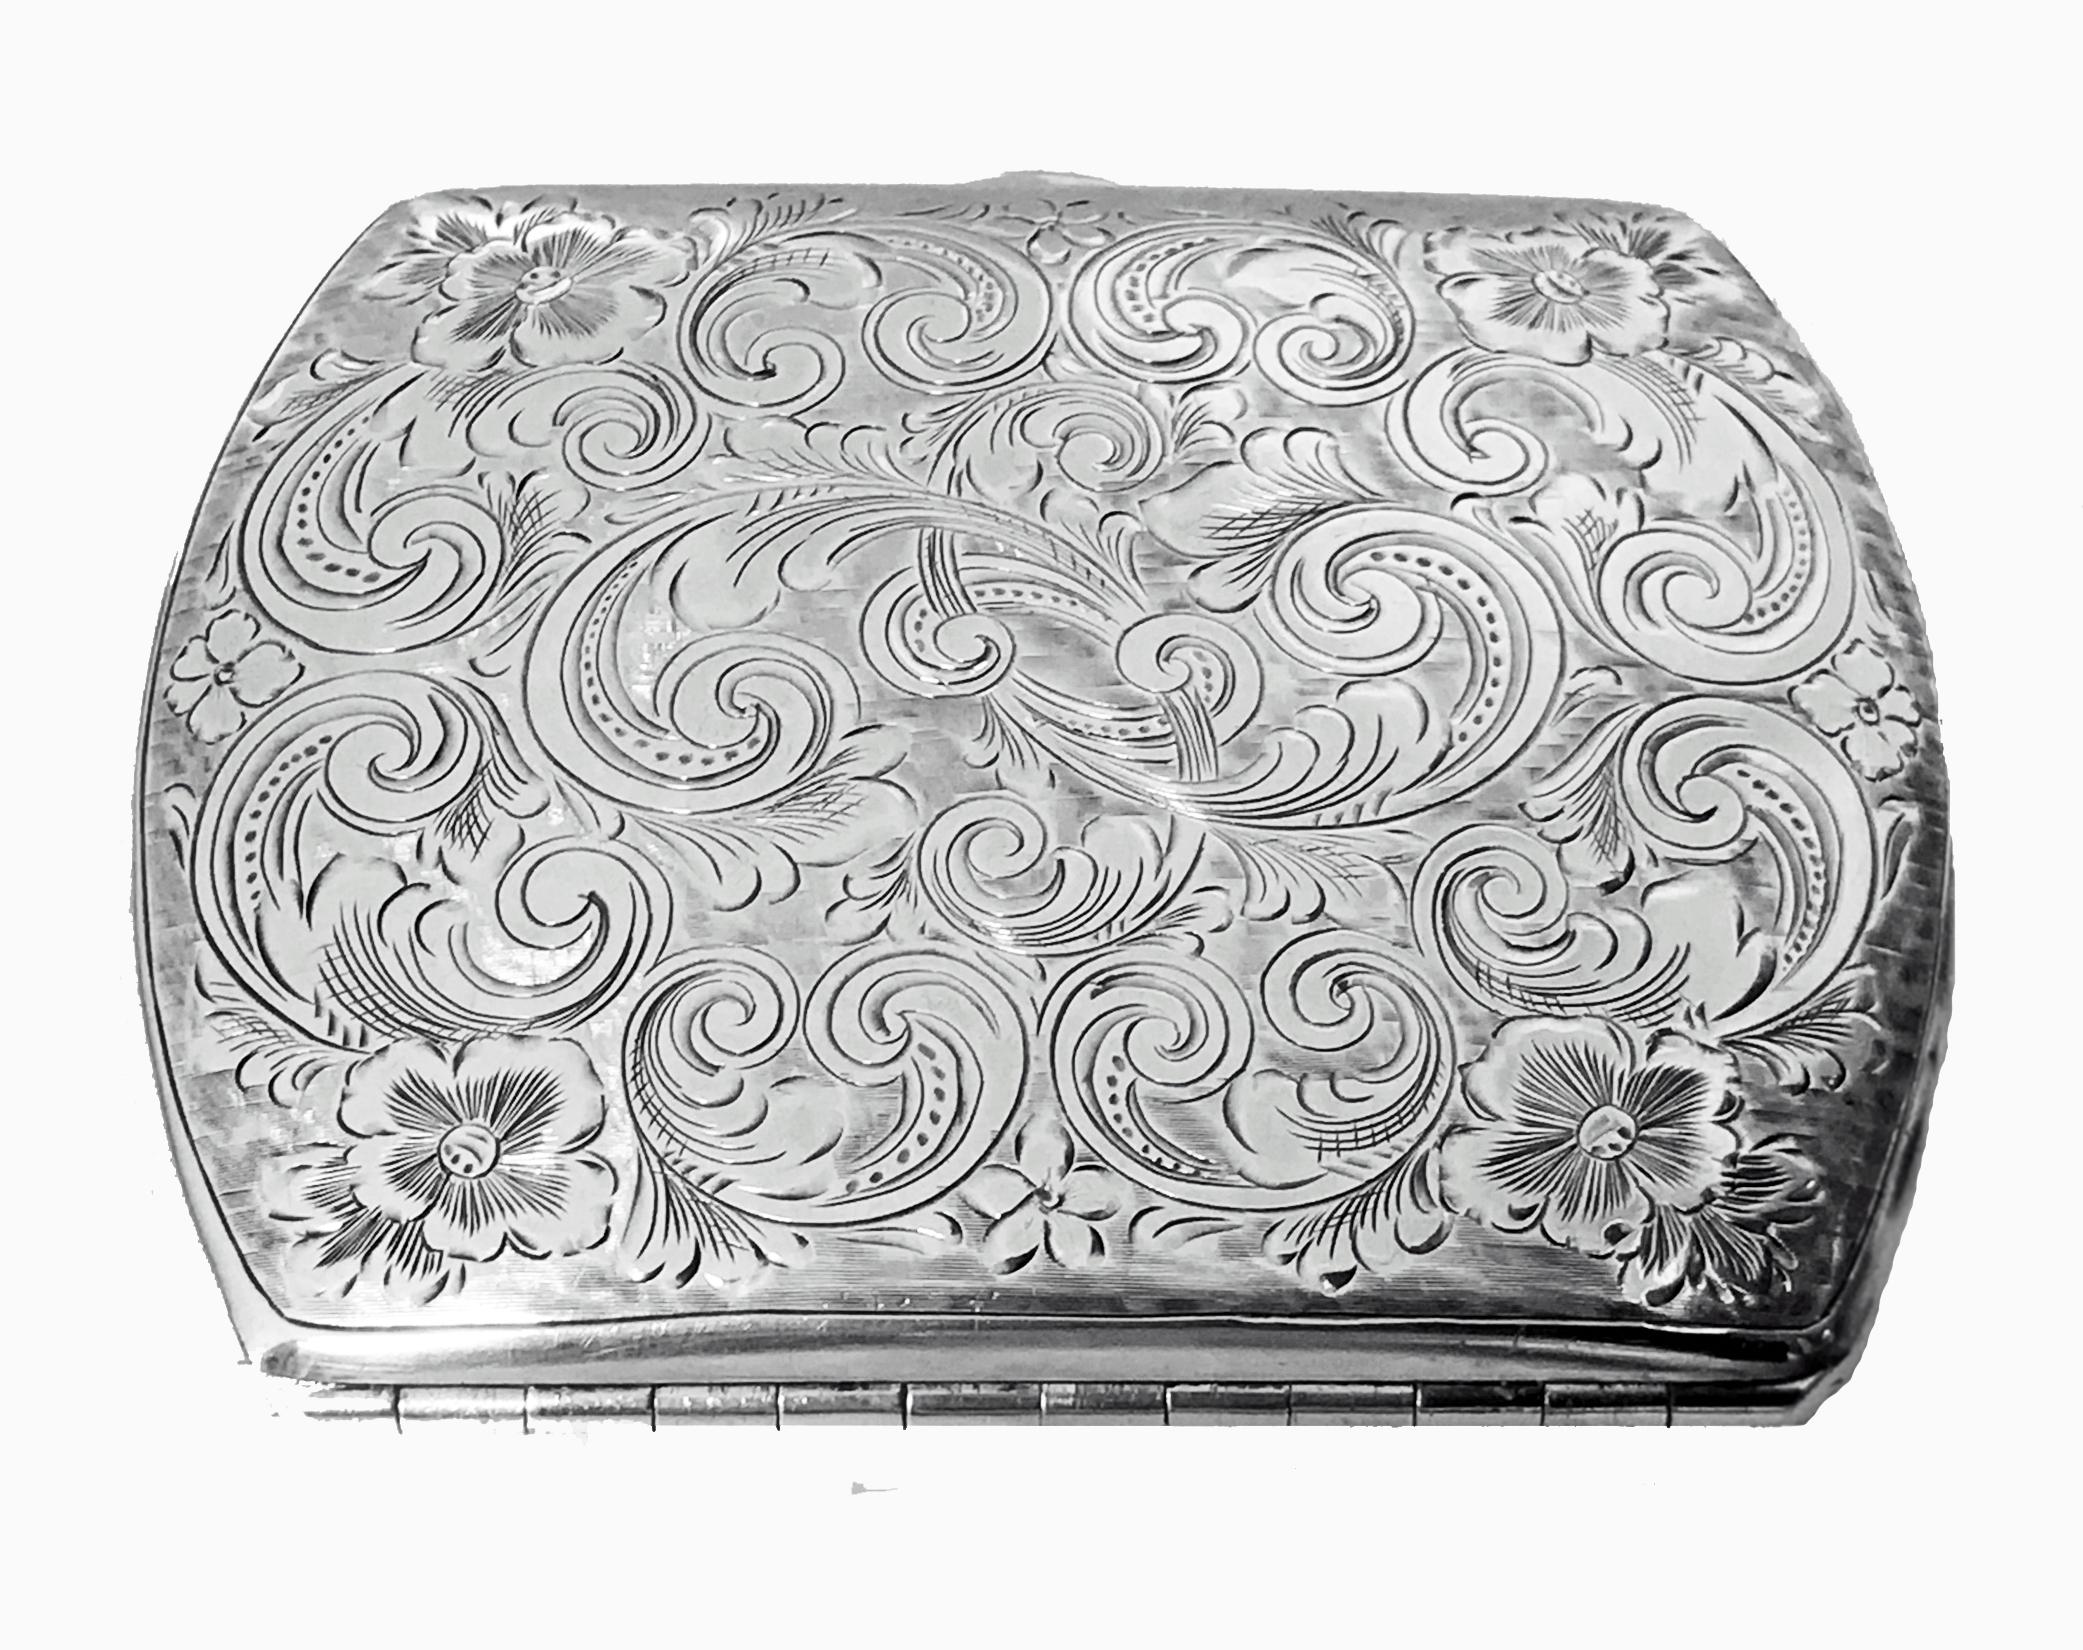 Antique Sterling Silver Cigarette or Card Case, American C.1920. The case of slightly rounded form richly engraved with foliate decoration, possible intricately engraved monogram to one side, but may be part of decoration, orange cabochon carnelian